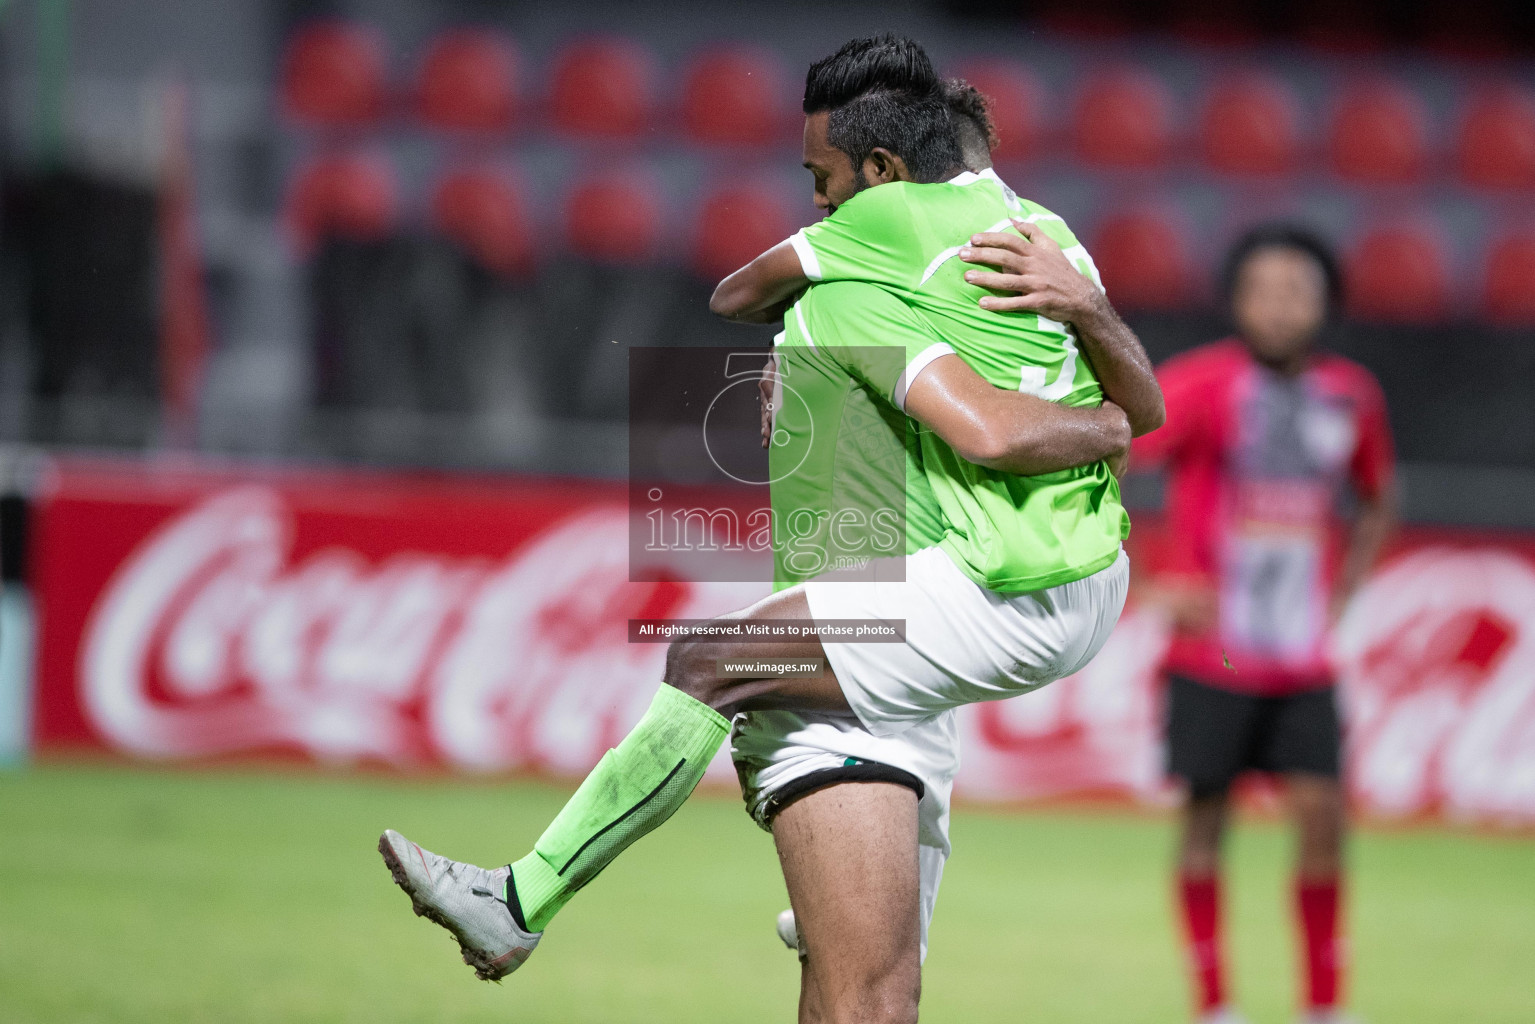 Green Streets vs Foakaidhoo FC in in Dhiraagu Dhivehi Premier League held in Male', Maldives on 25th October 2019 Photos: Suadh Abdul Sattar/images.mv